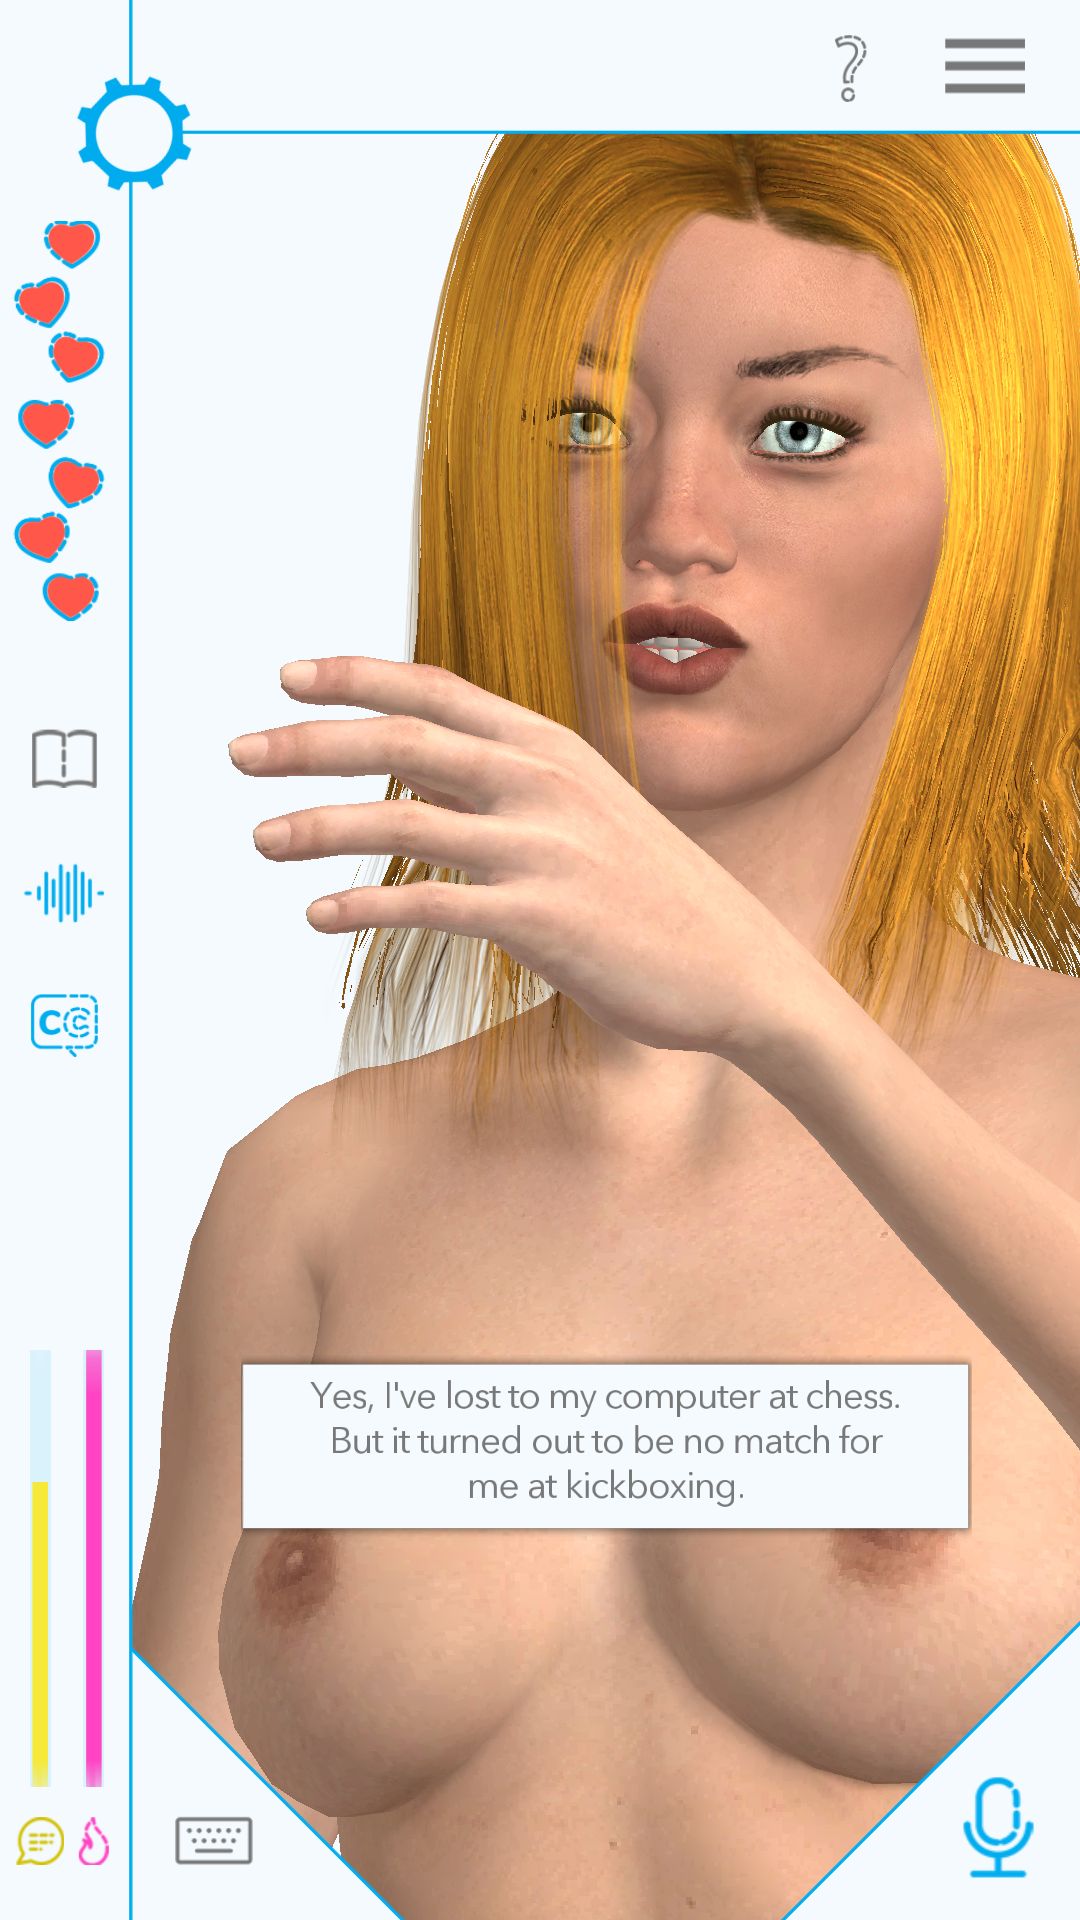 Screenshot from a user’s post on the Club RealDoll forums